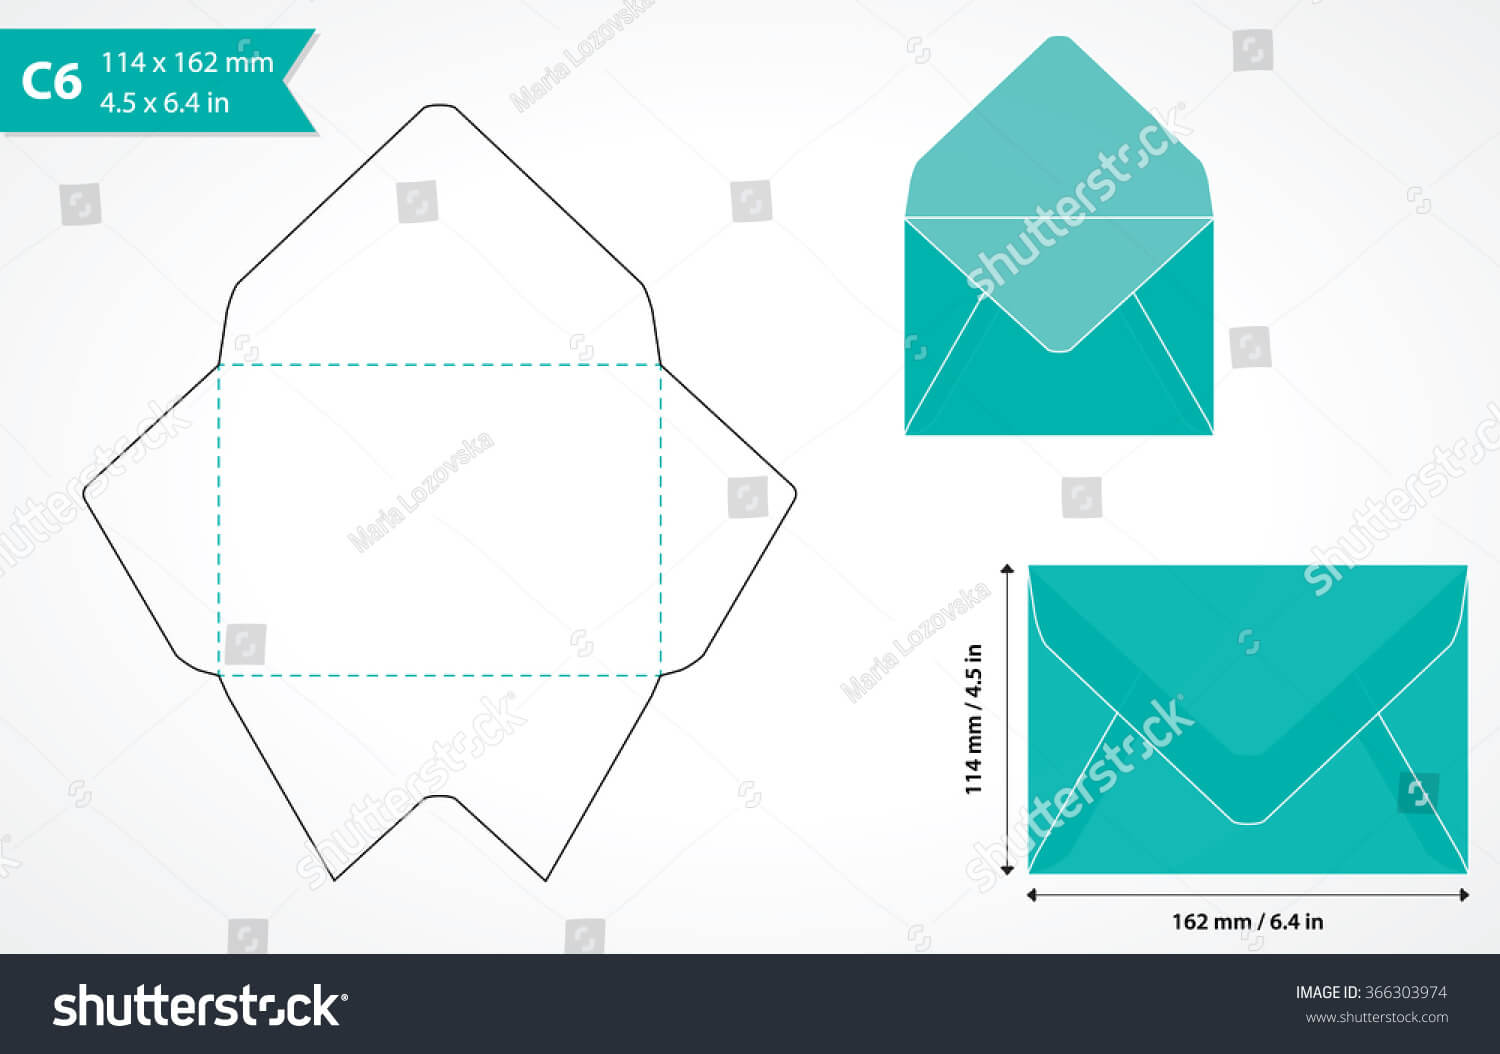 Envelope Template Images, Stock Photos & Vectors | Shutterstock With Regard To Envelope Templates For Card Making